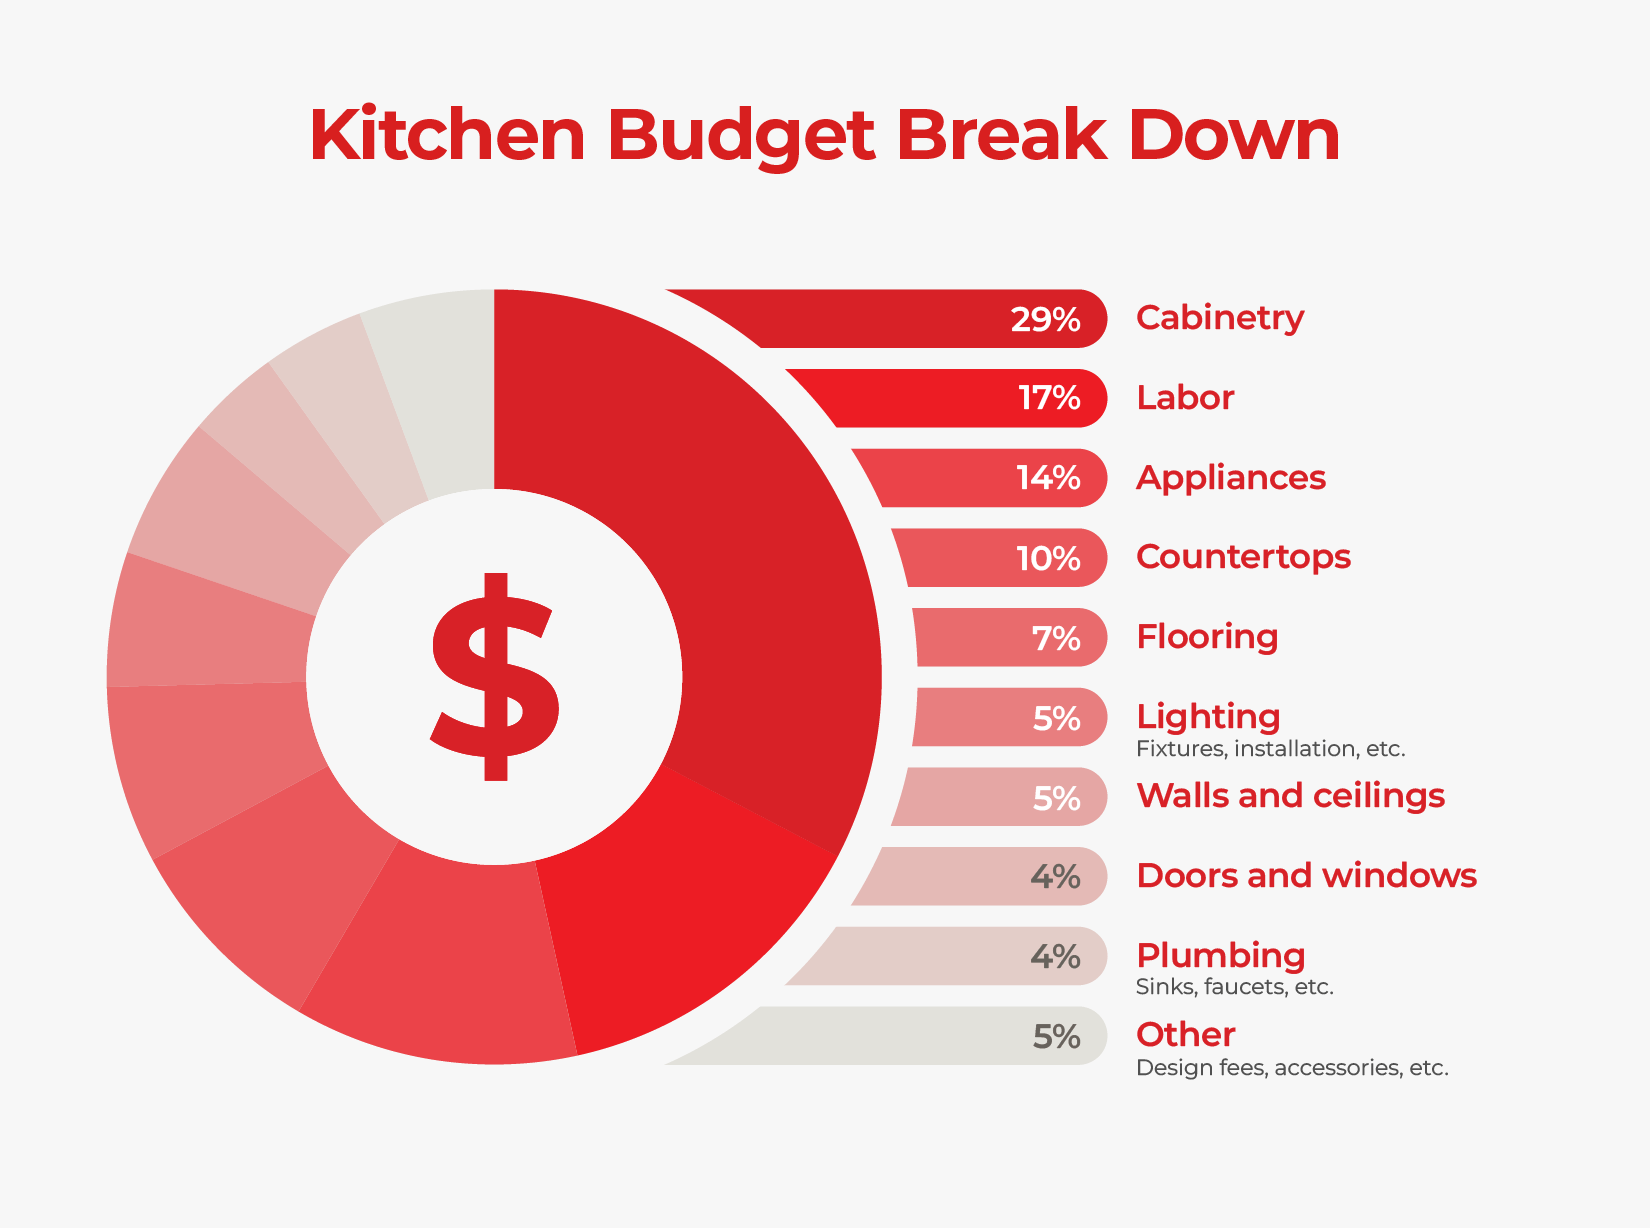 Graph breaking down average kitchen renovation costs by common kitchen elements.